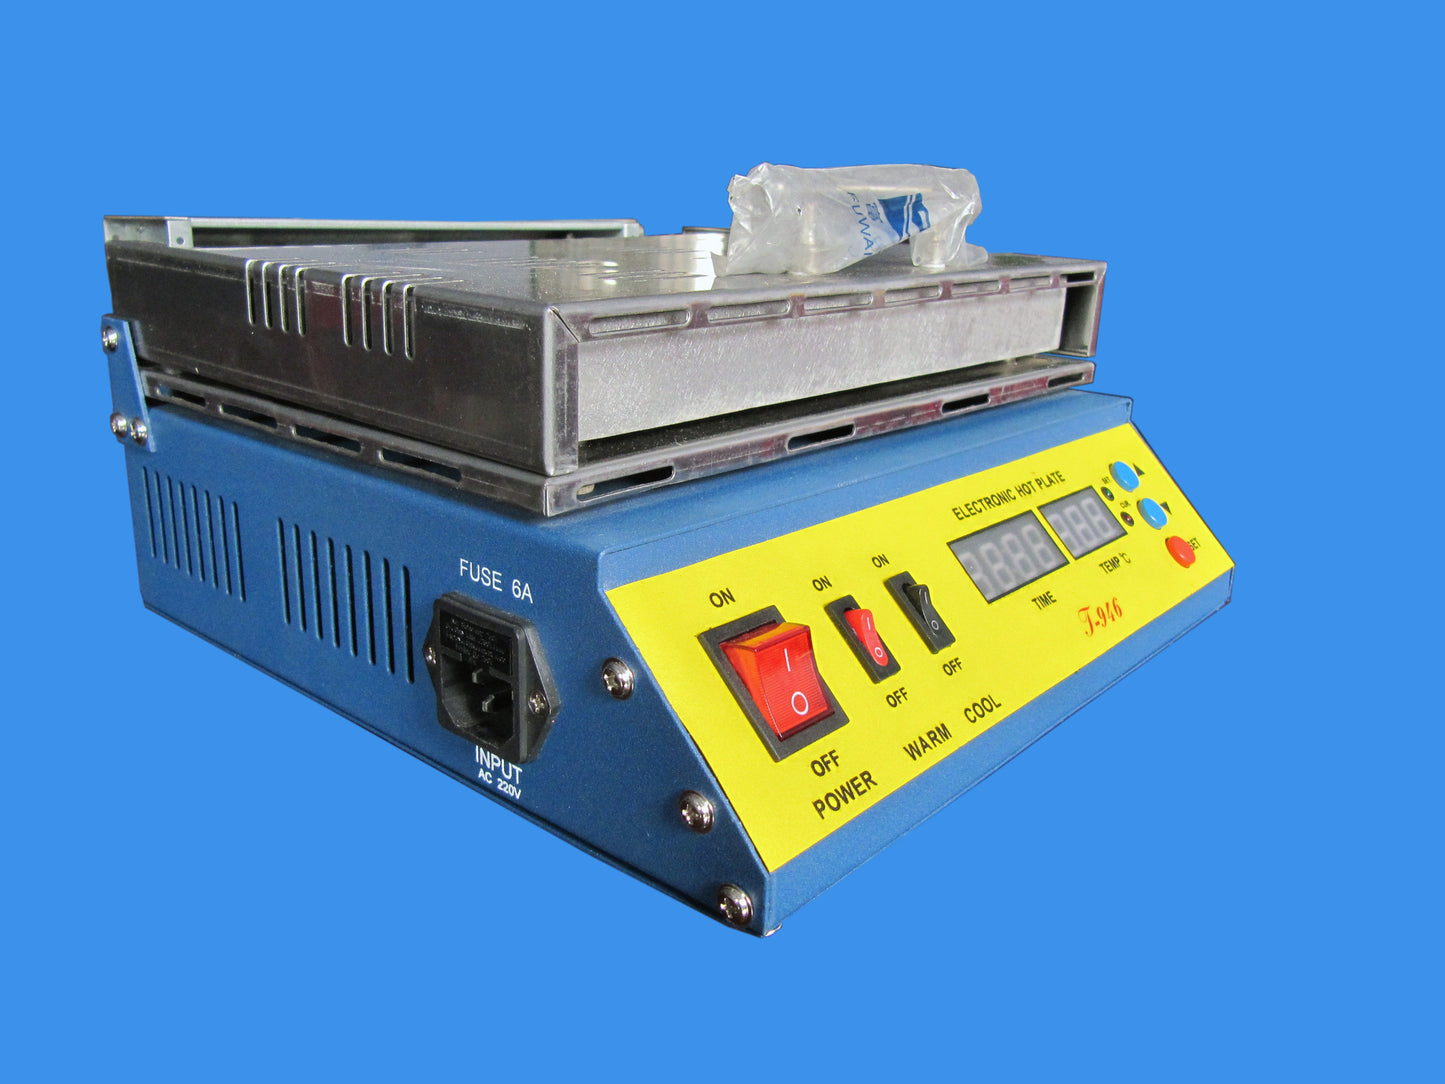 Electronic Hot Plate T-946 with 180*240mm Work Size